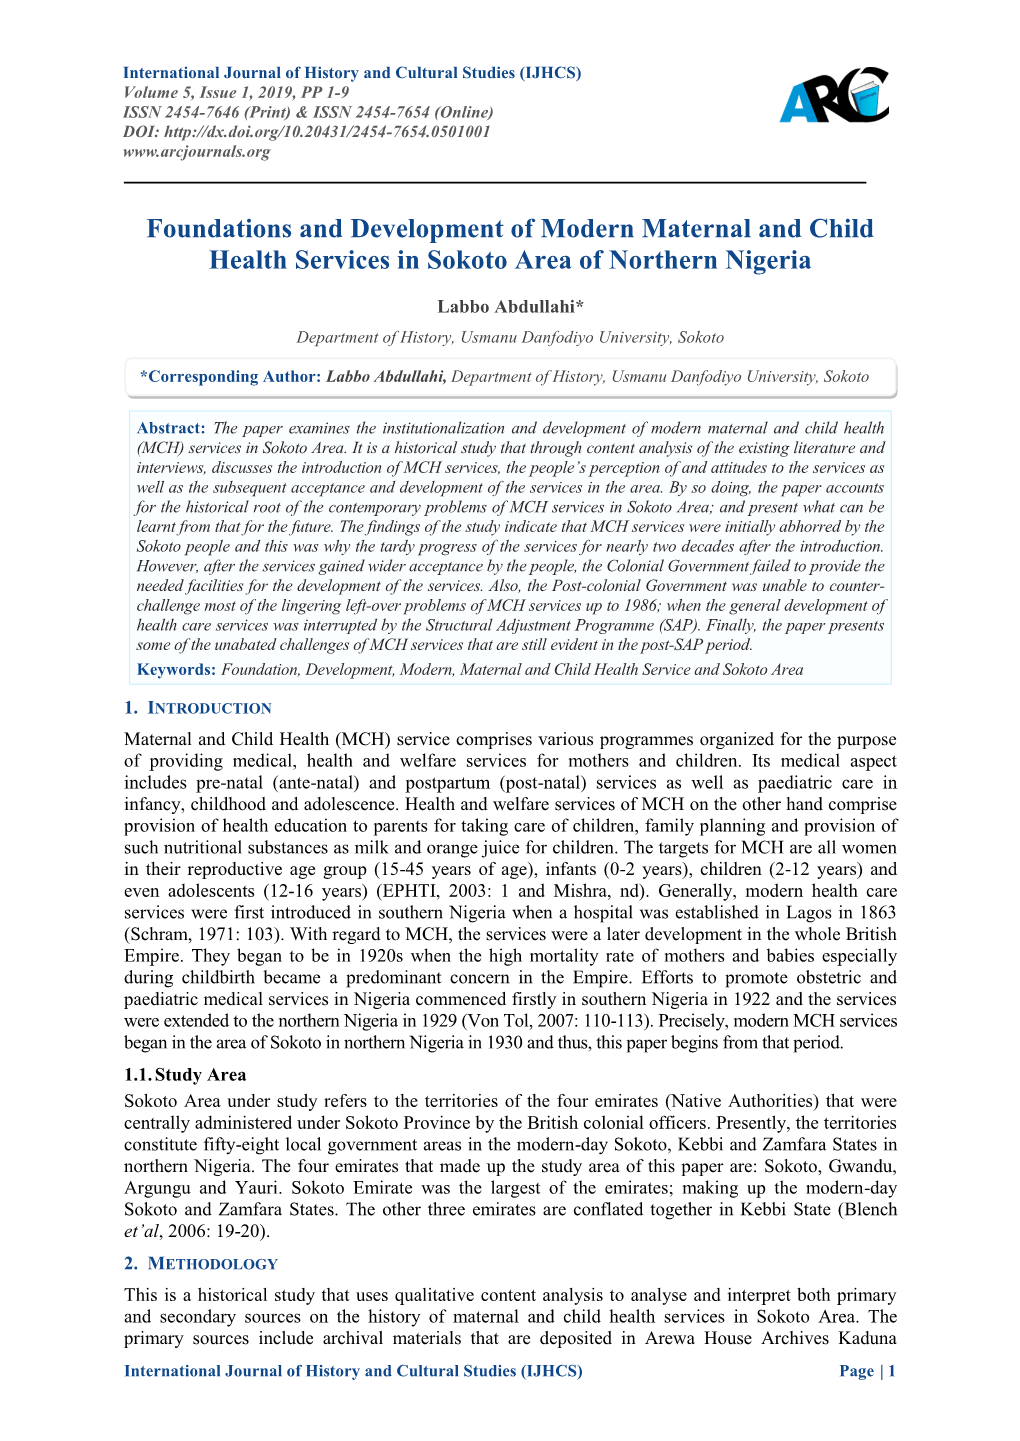 Foundations and Development of Modern Maternal and Child Health Services in Sokoto Area of Northern Nigeria